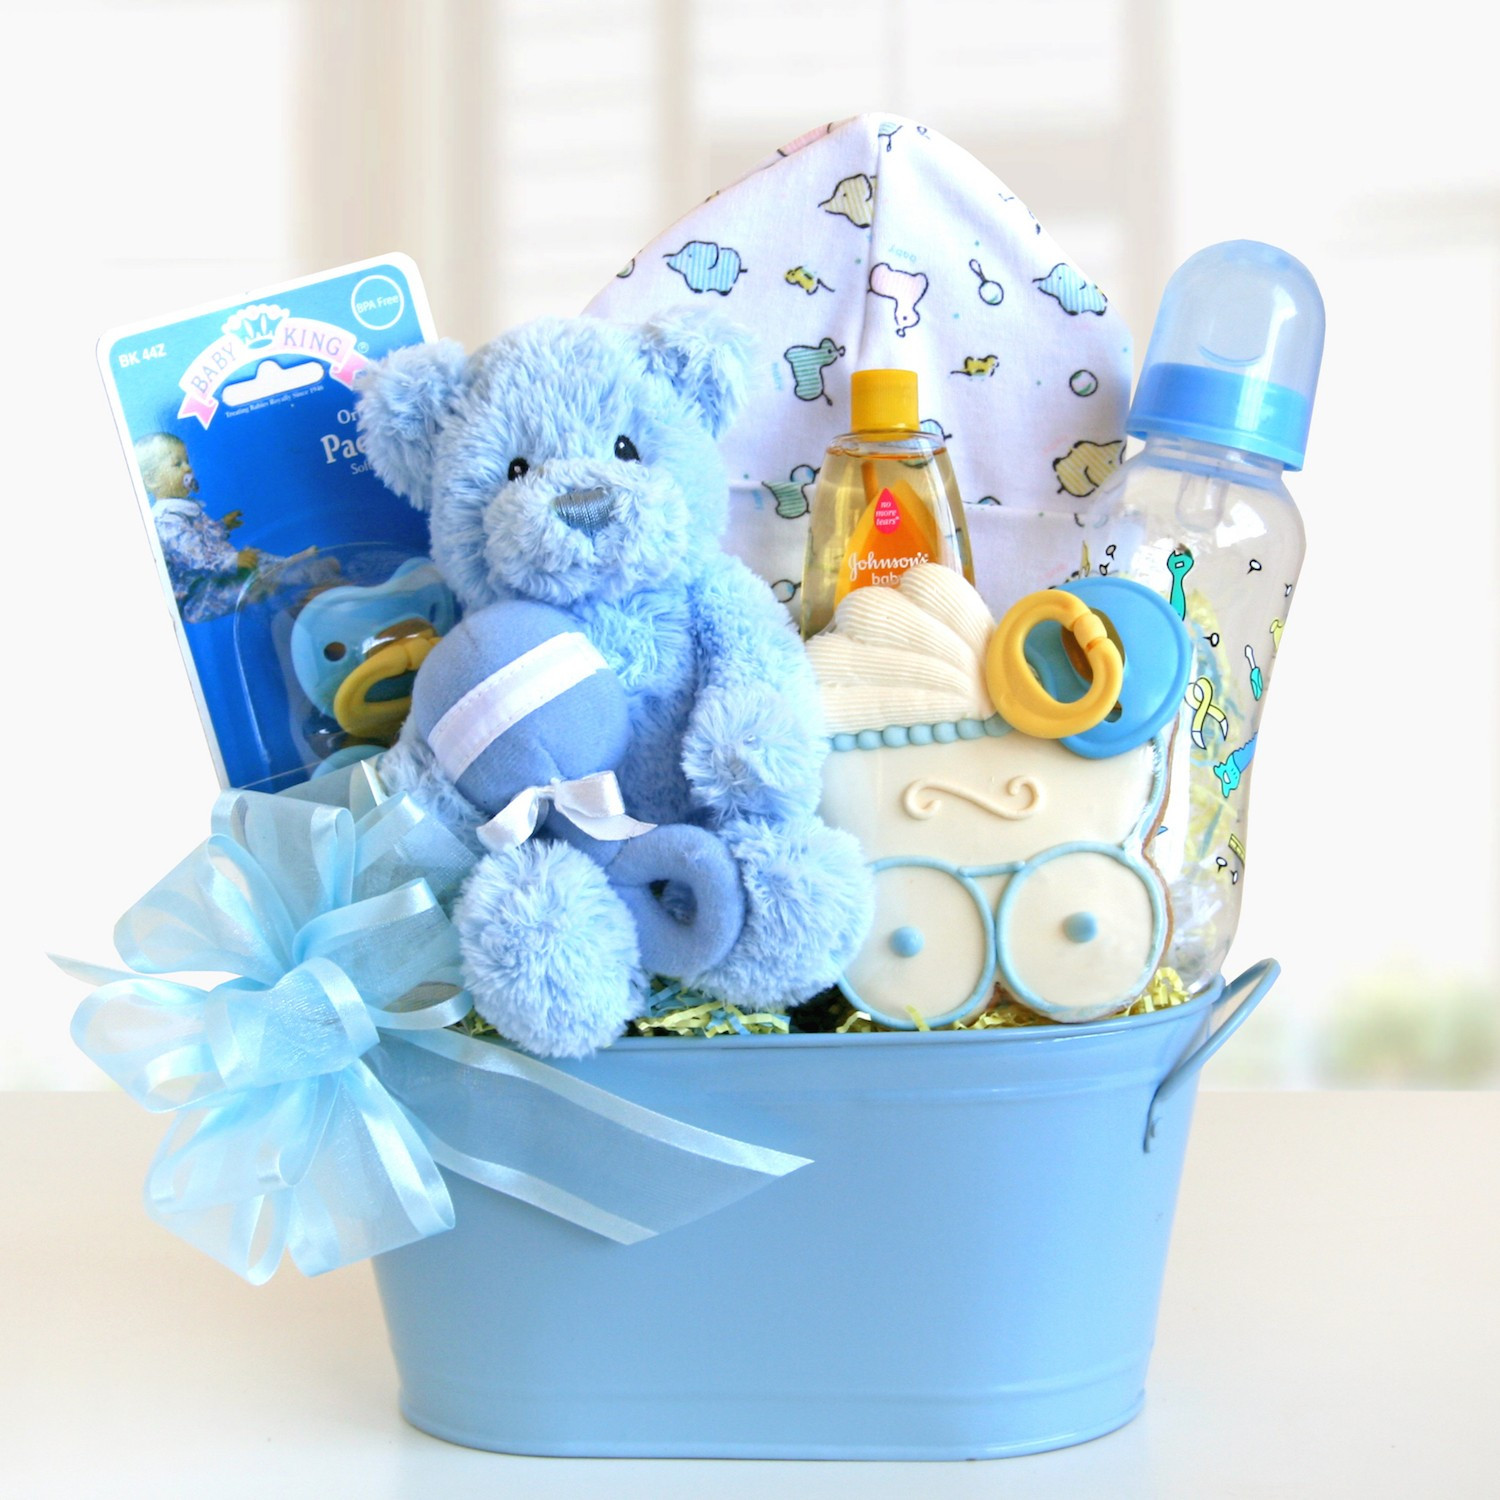 Born Baby Gift Ideas
 Sweet and Cuddly Baby Boy Gift Basket Gift Baskets Plus